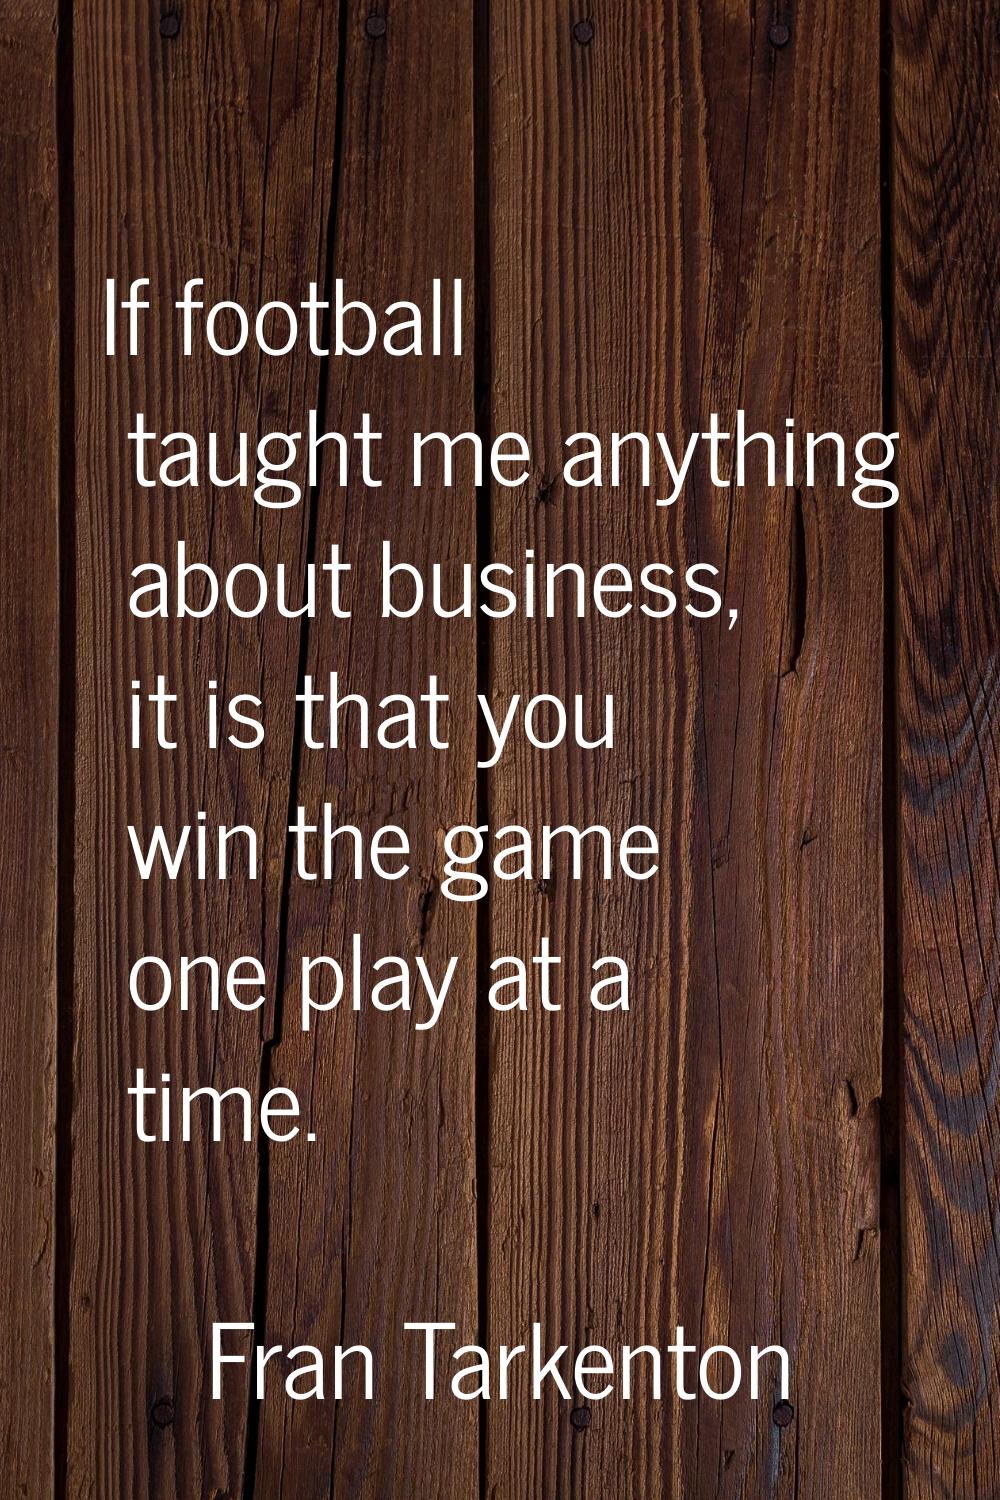 If football taught me anything about business, it is that you win the game one play at a time.